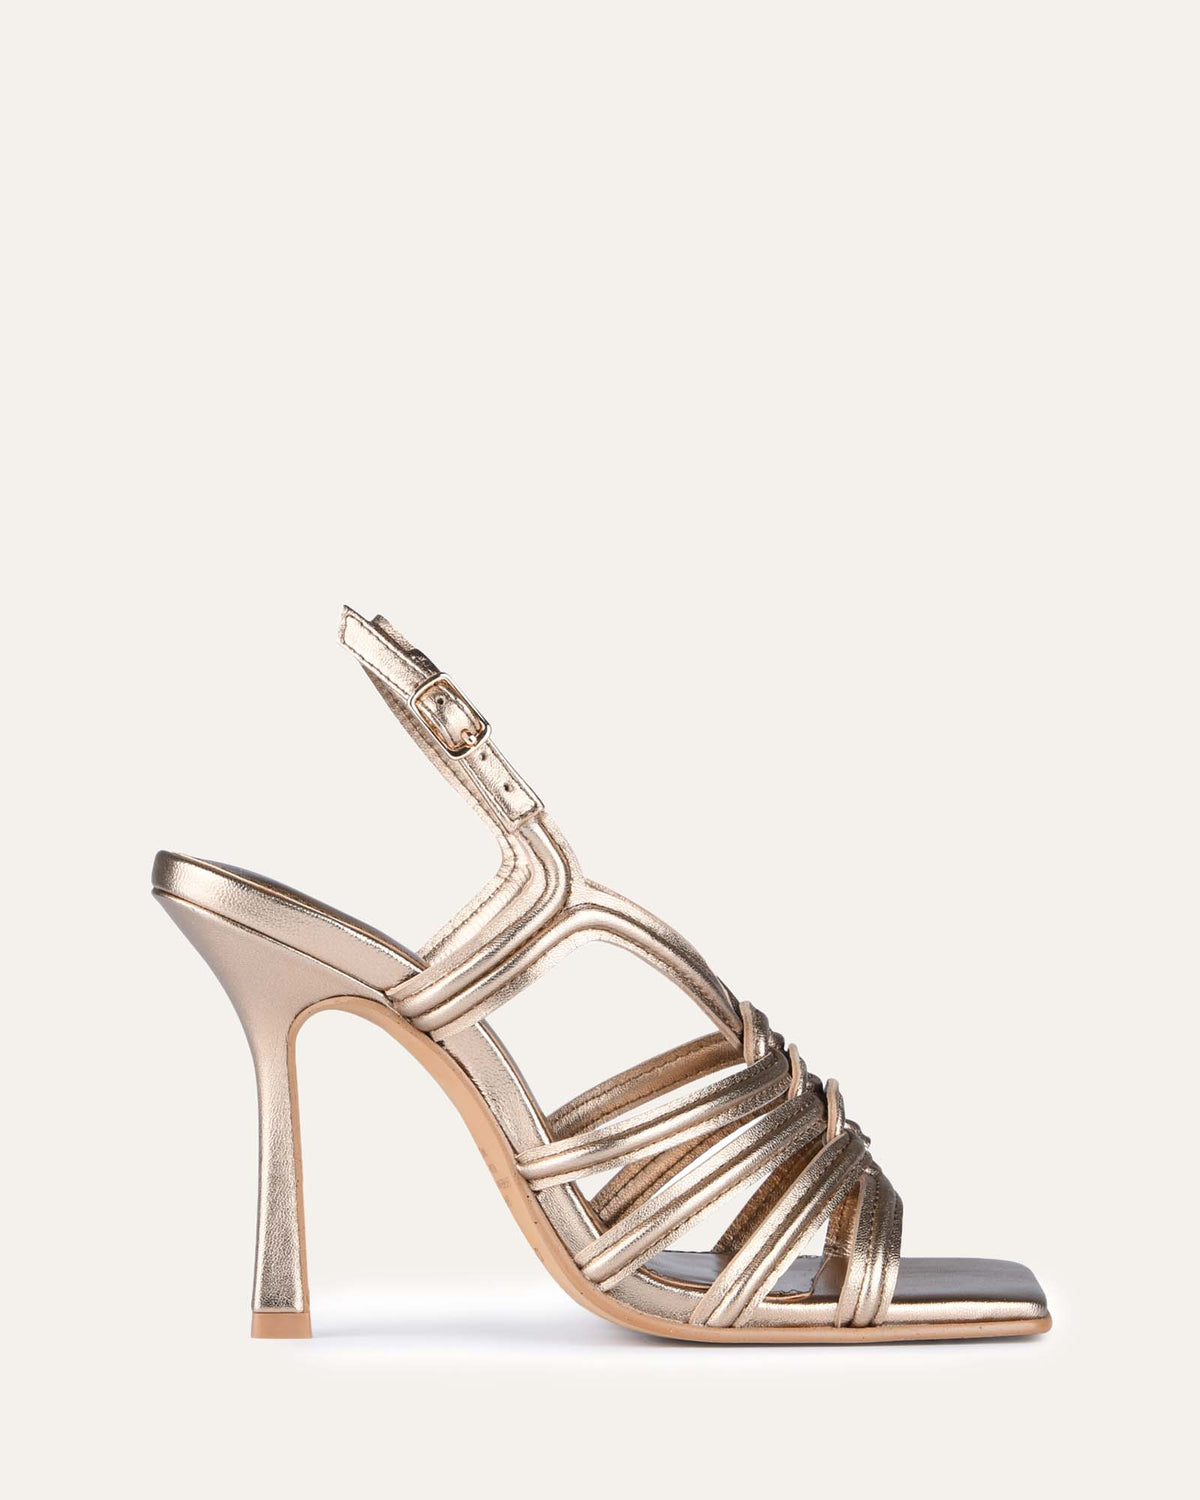 LIBBY HIGH HEEL SANDALS SOFT GOLD LEATHER